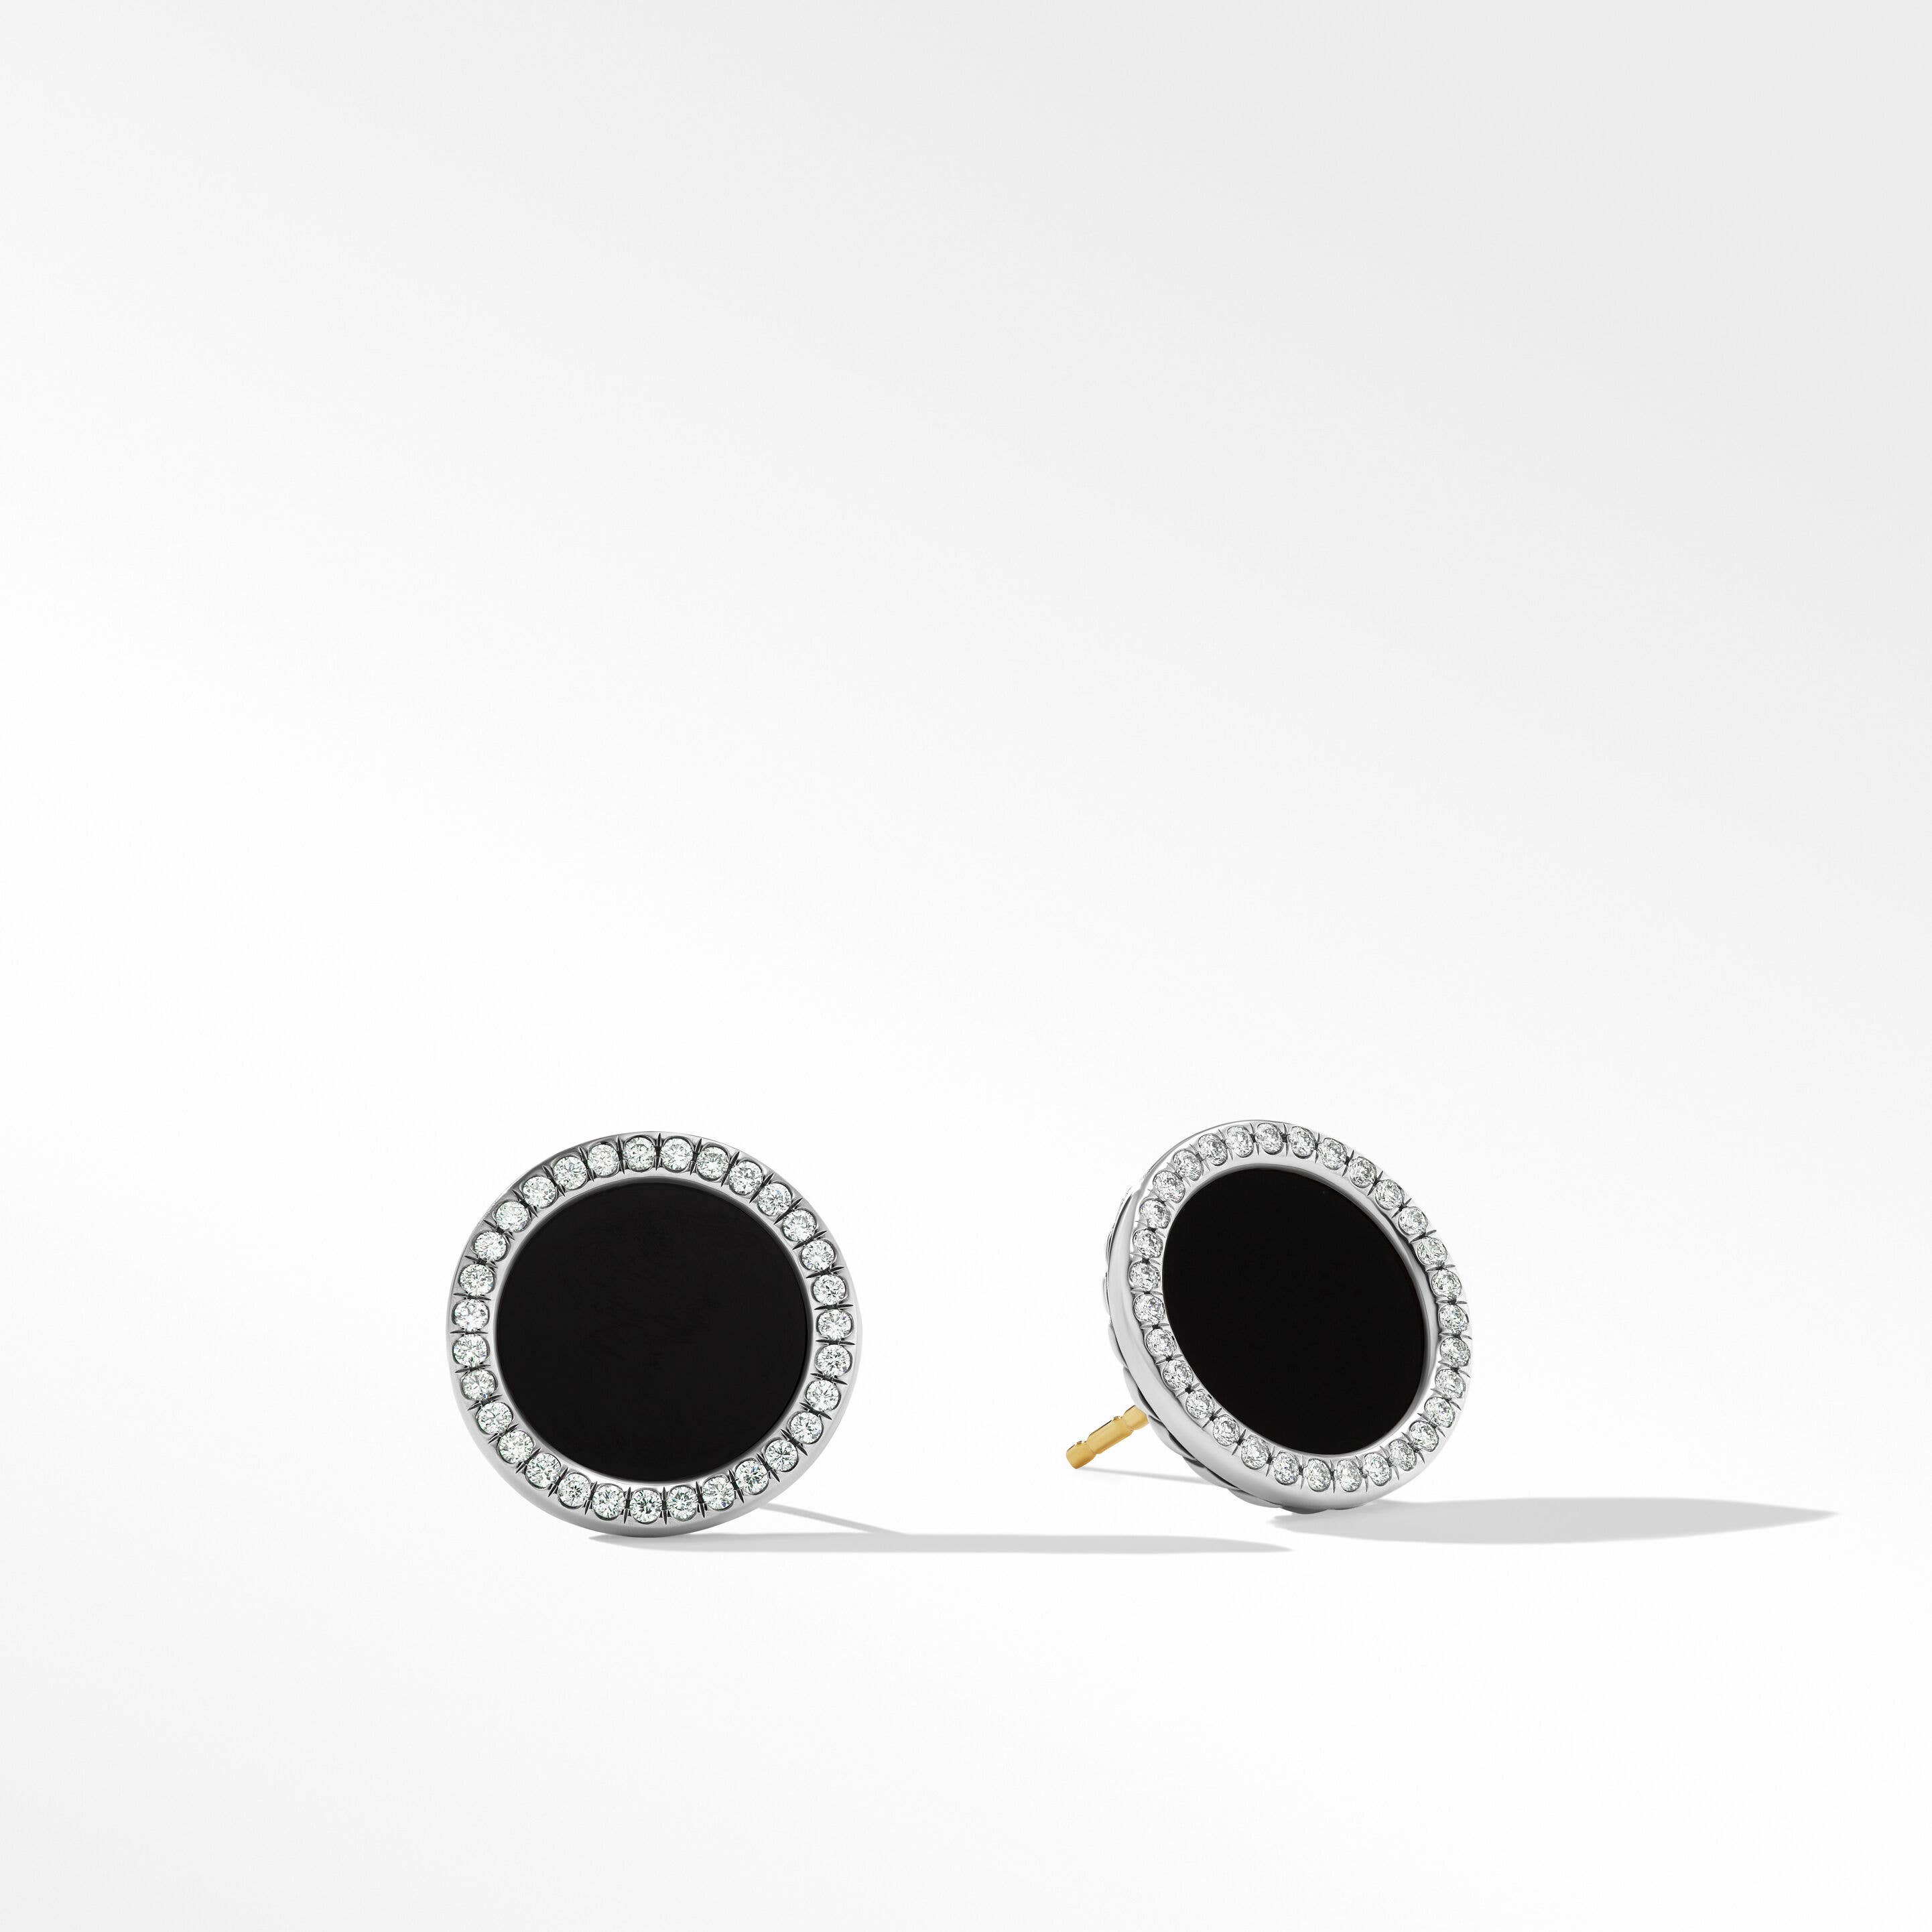 DY Elements® Stud Earrings with Black Onyx and Pavé Diamonds